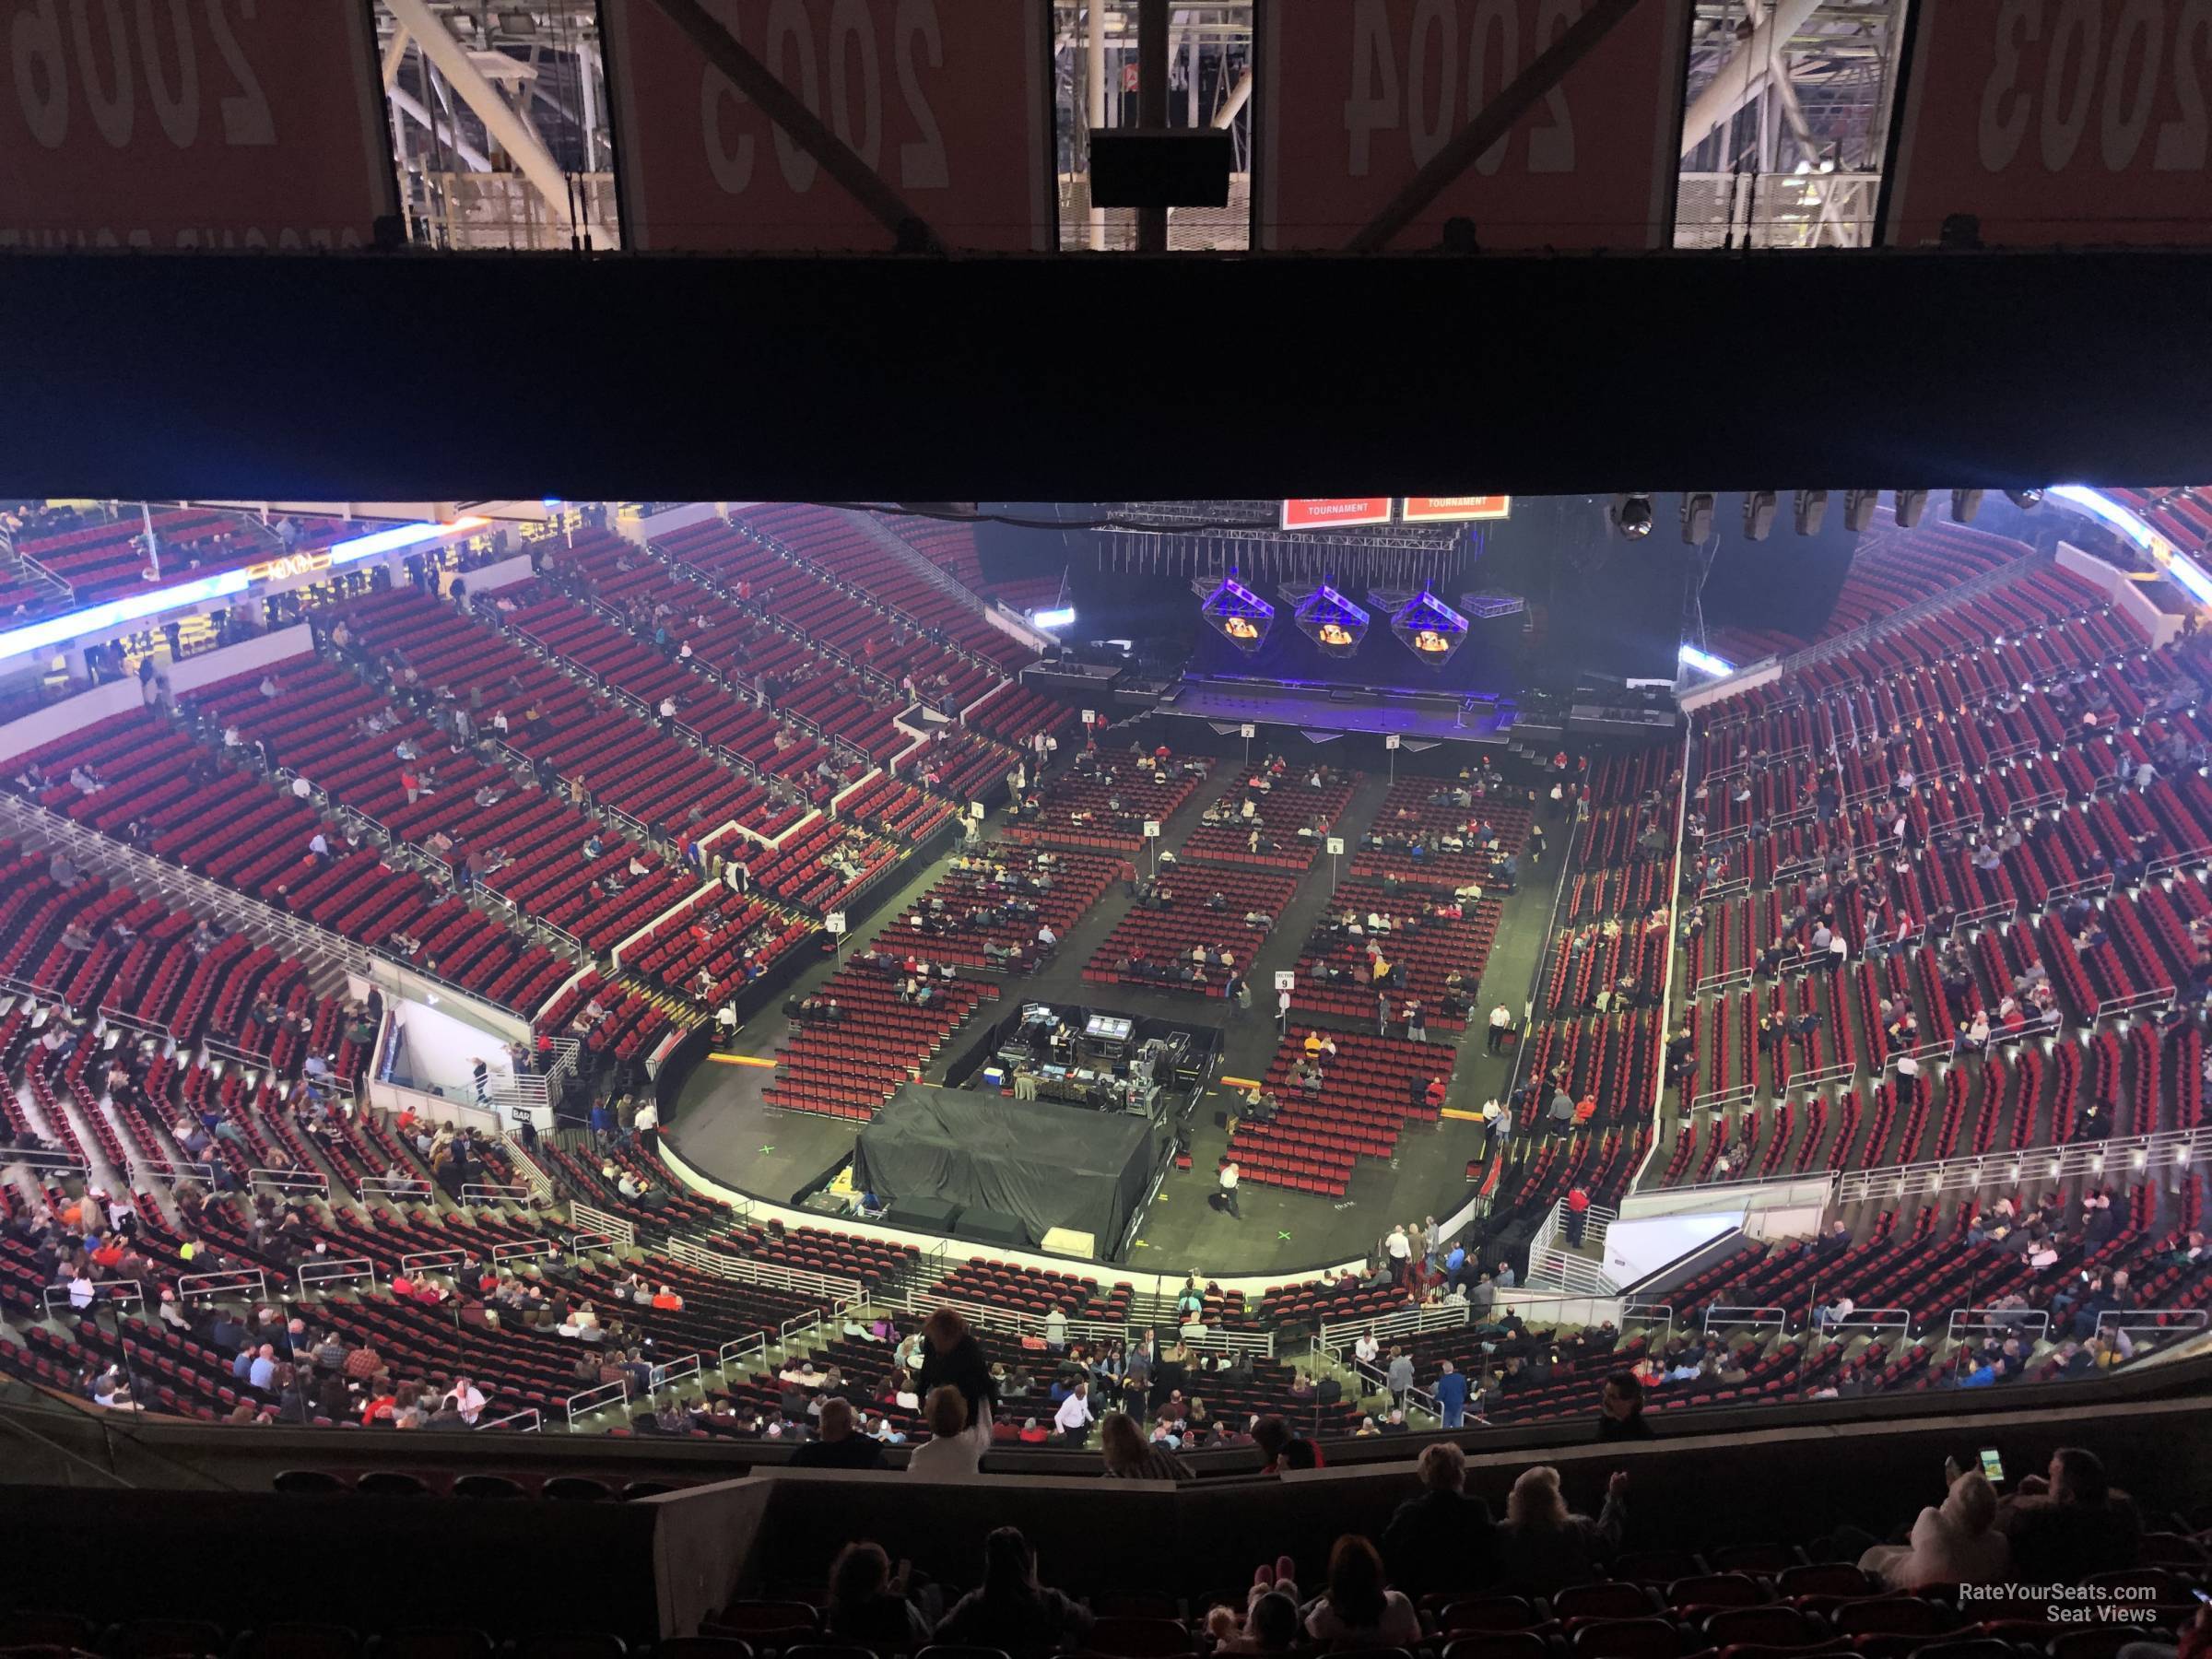 PNC Arena Section 332 Concert Seating - RateYourSeats.com